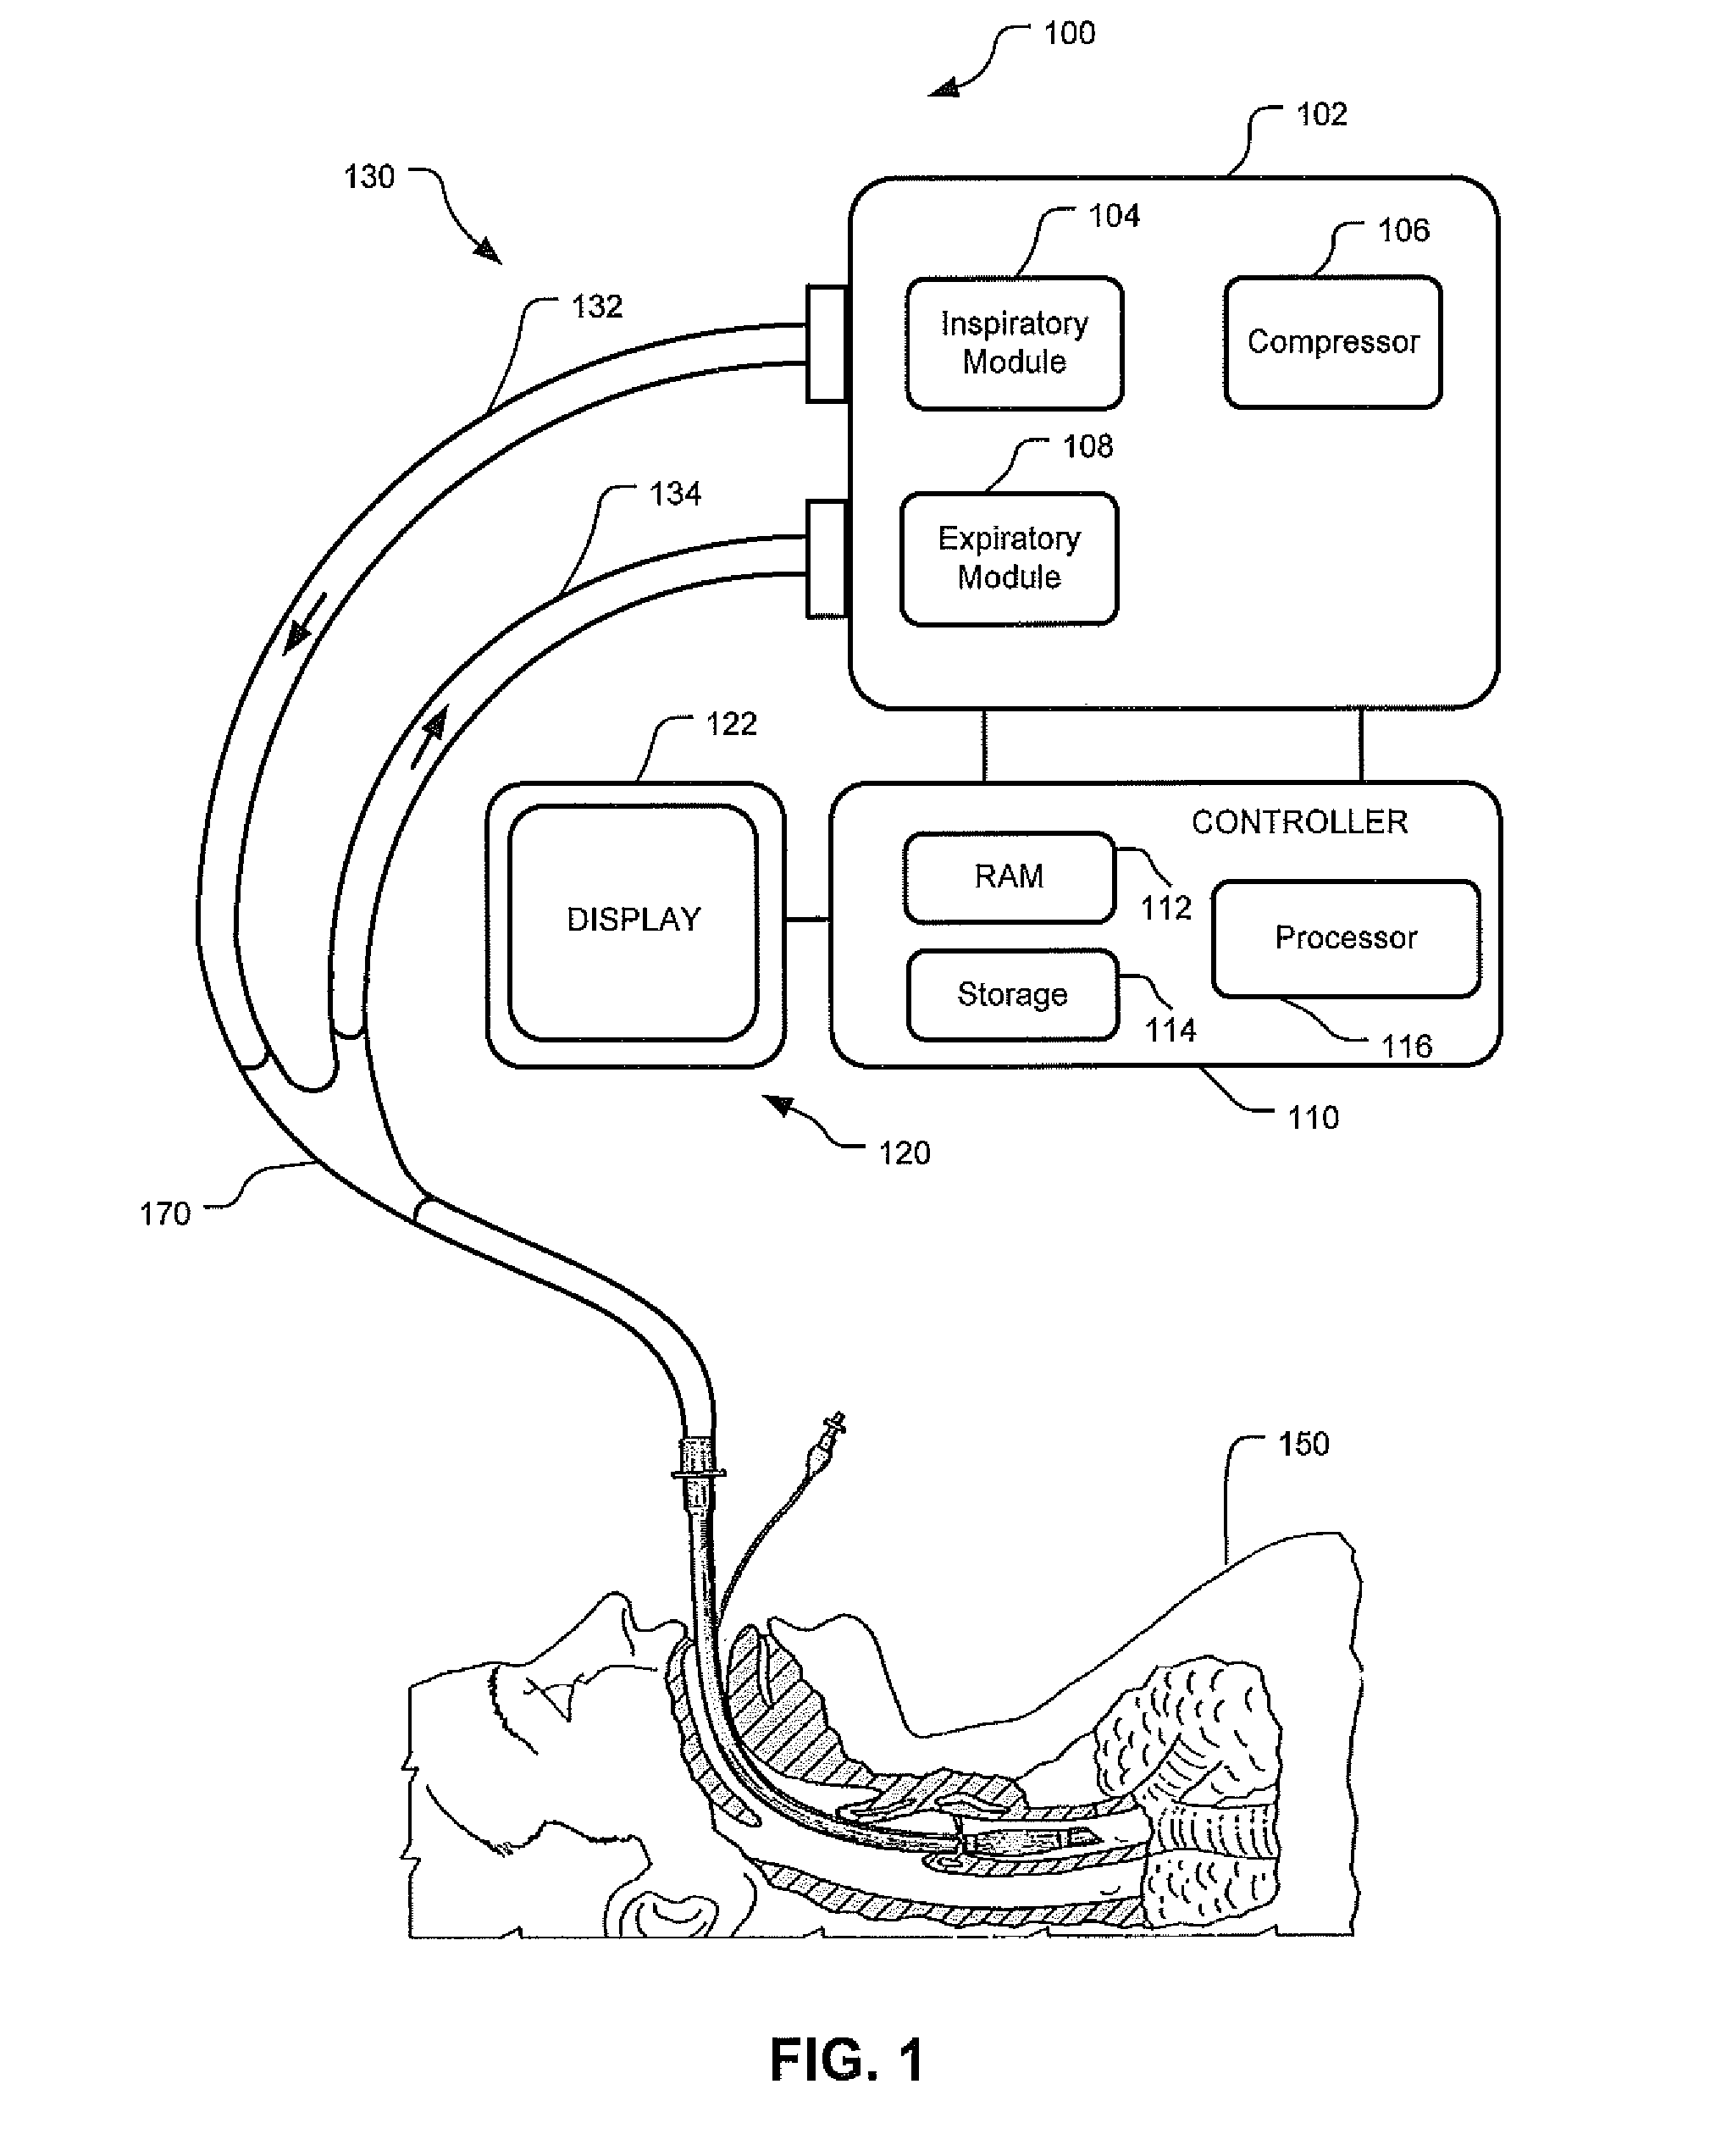 Nuisance alarm reduction method for therapeutic parameters